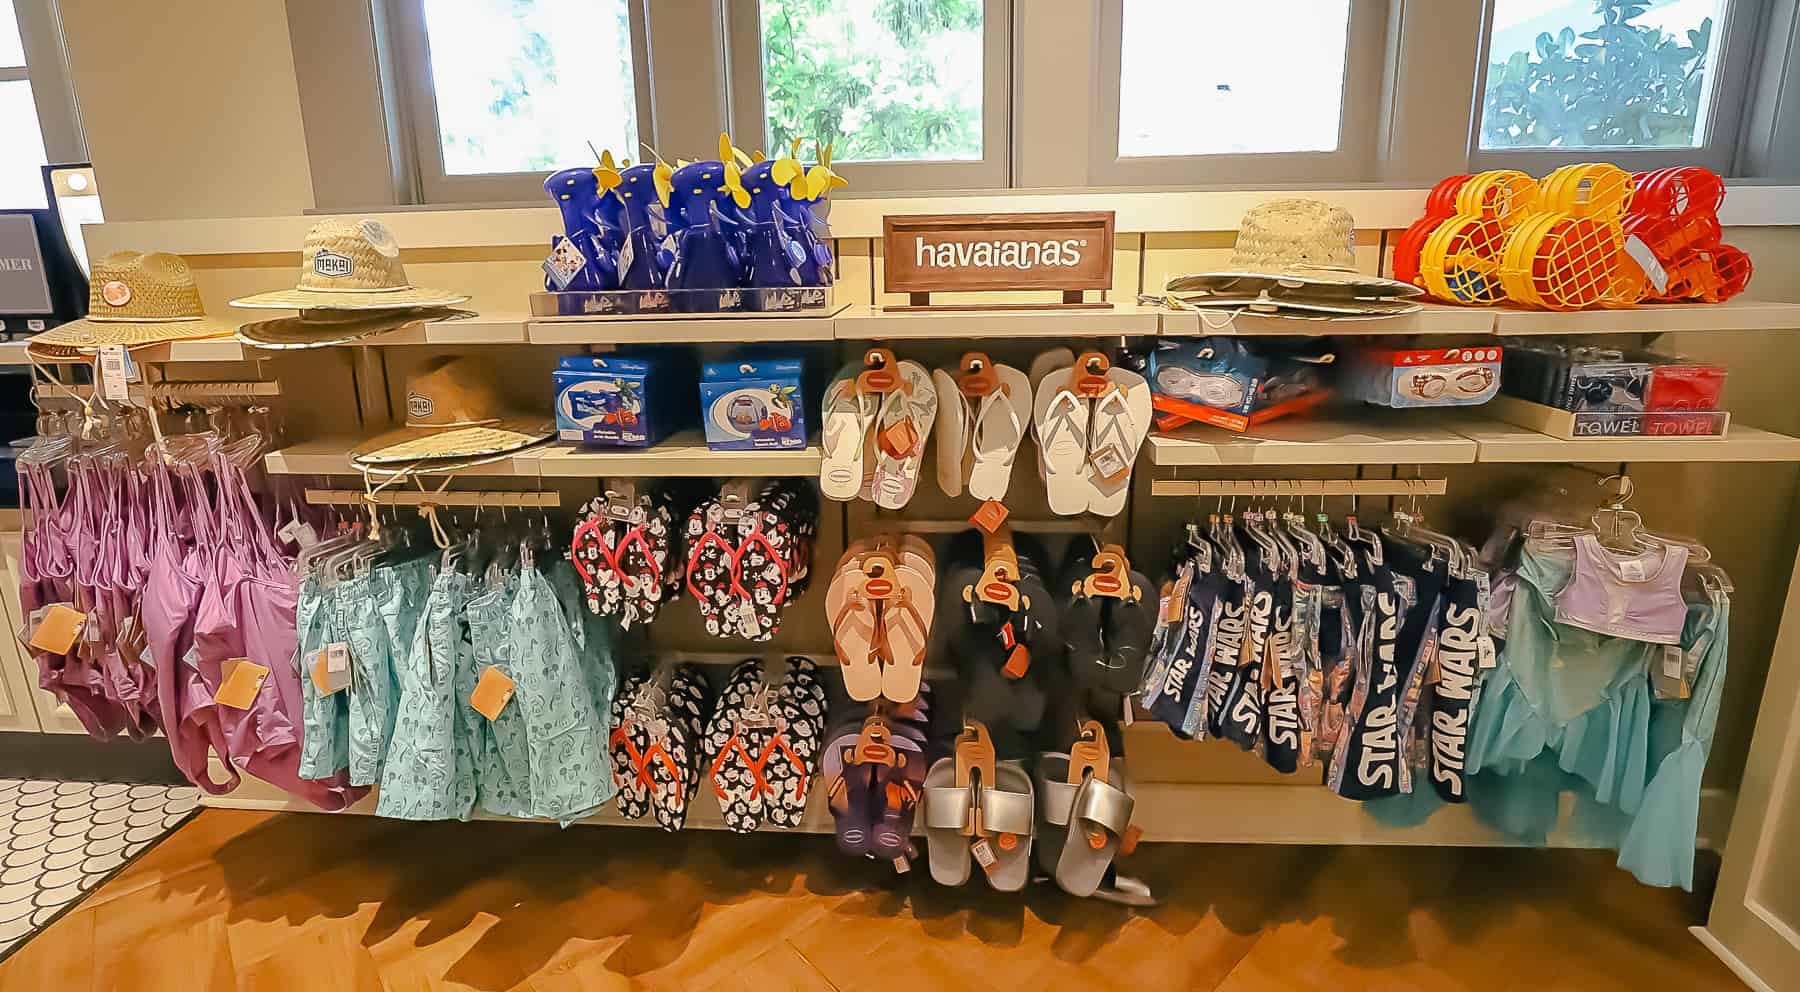 Pool Items at Disney's Beach Club's gift shop like goggles, floats, and swimwear 